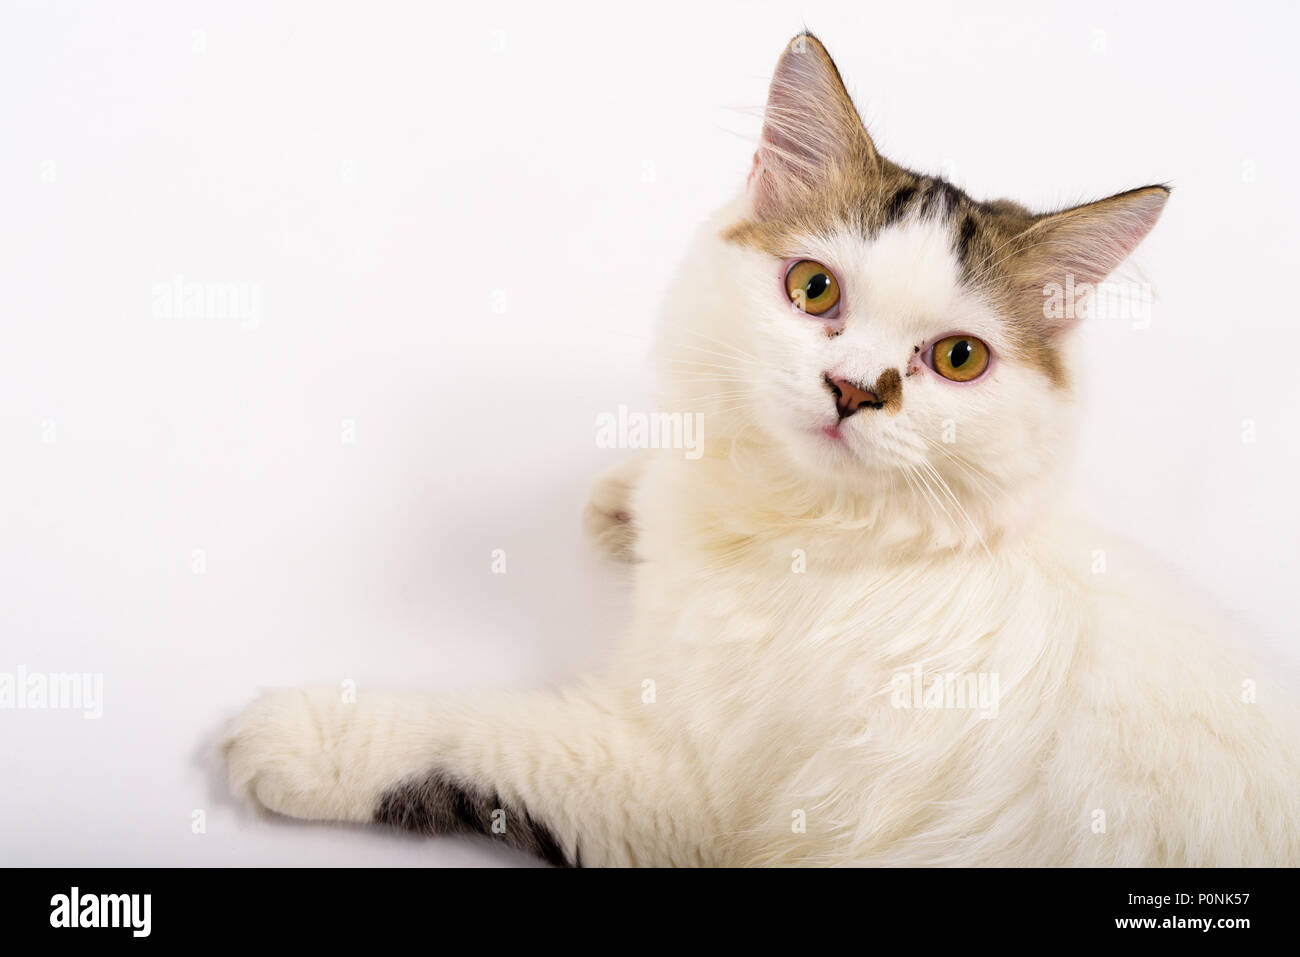 Cute Fluffy Persian Cat Against White Background Stock Photo